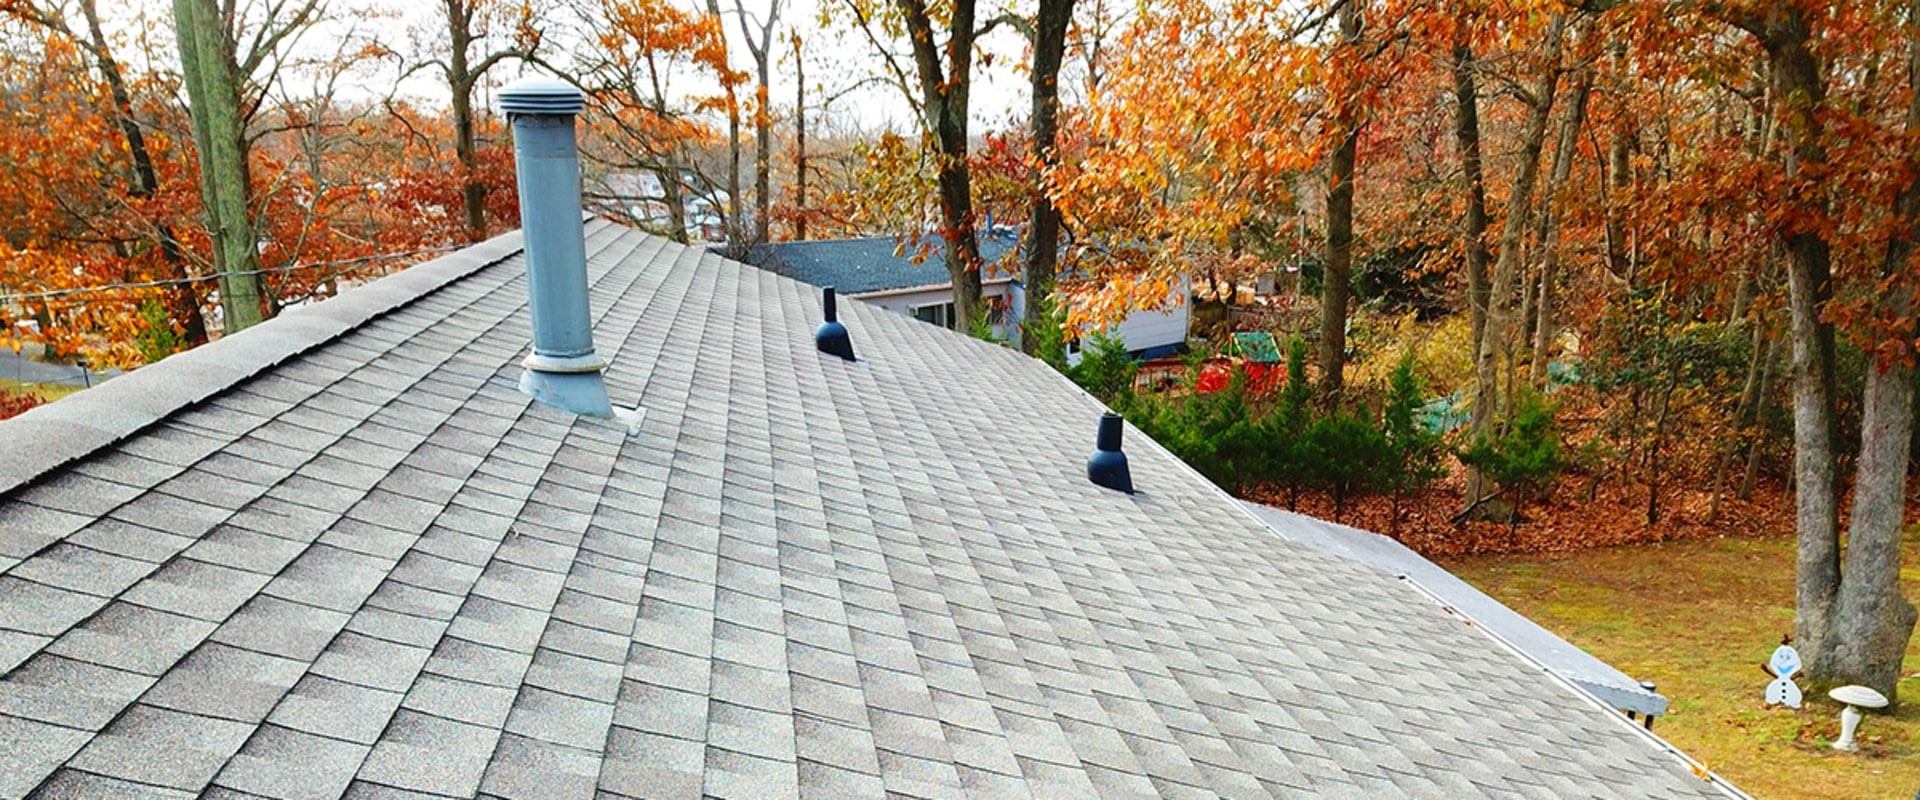 How to Determine When It's Time to Replace Your Roof